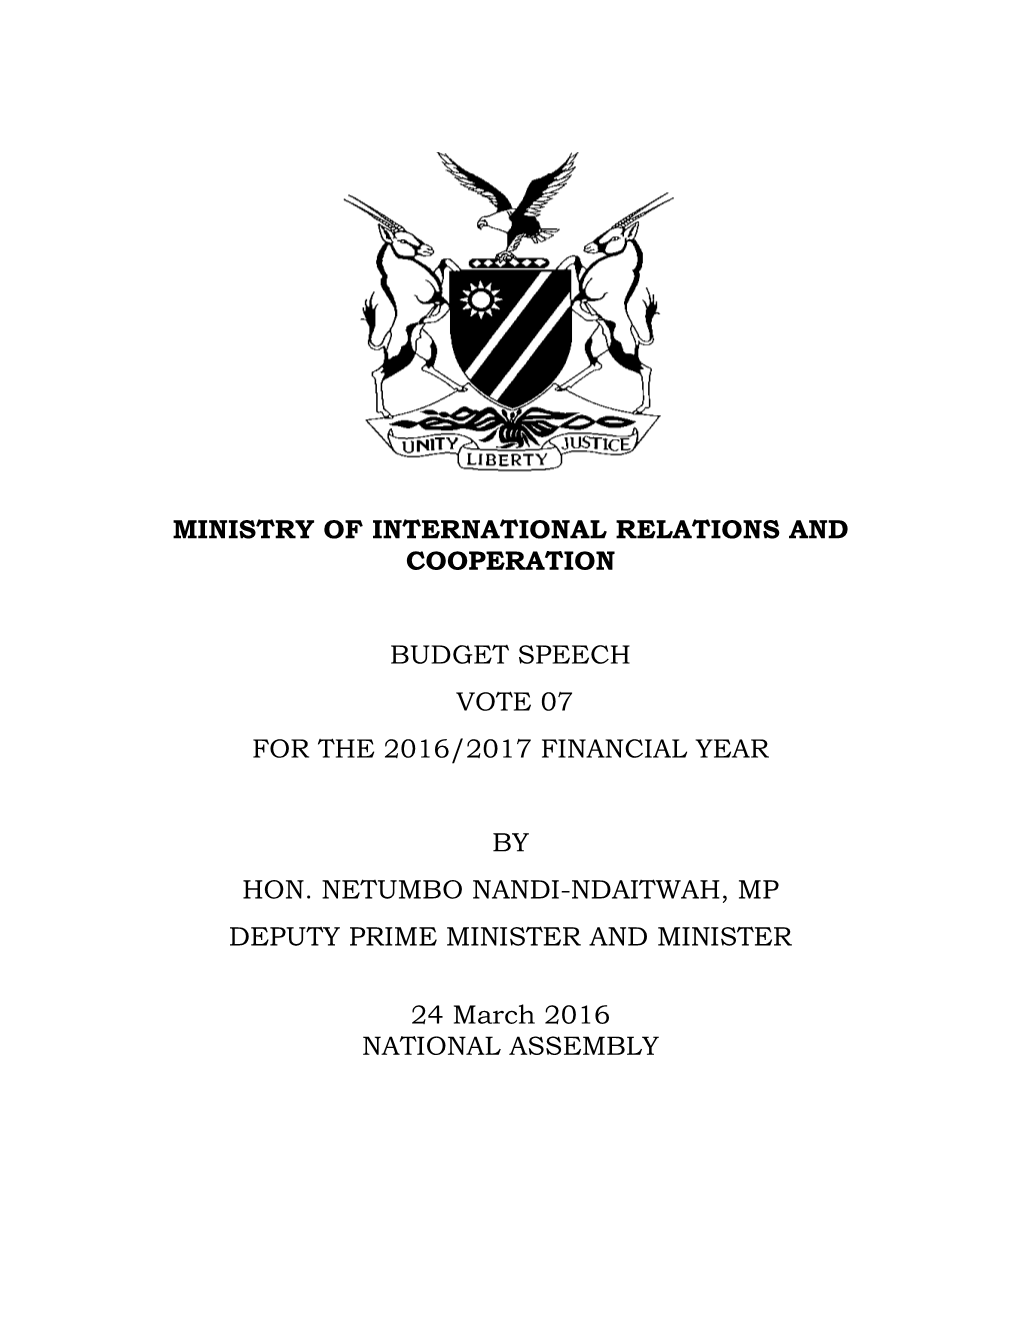 Budget Speech Vote 07 for the 2016/2017 Financial Year by Hon